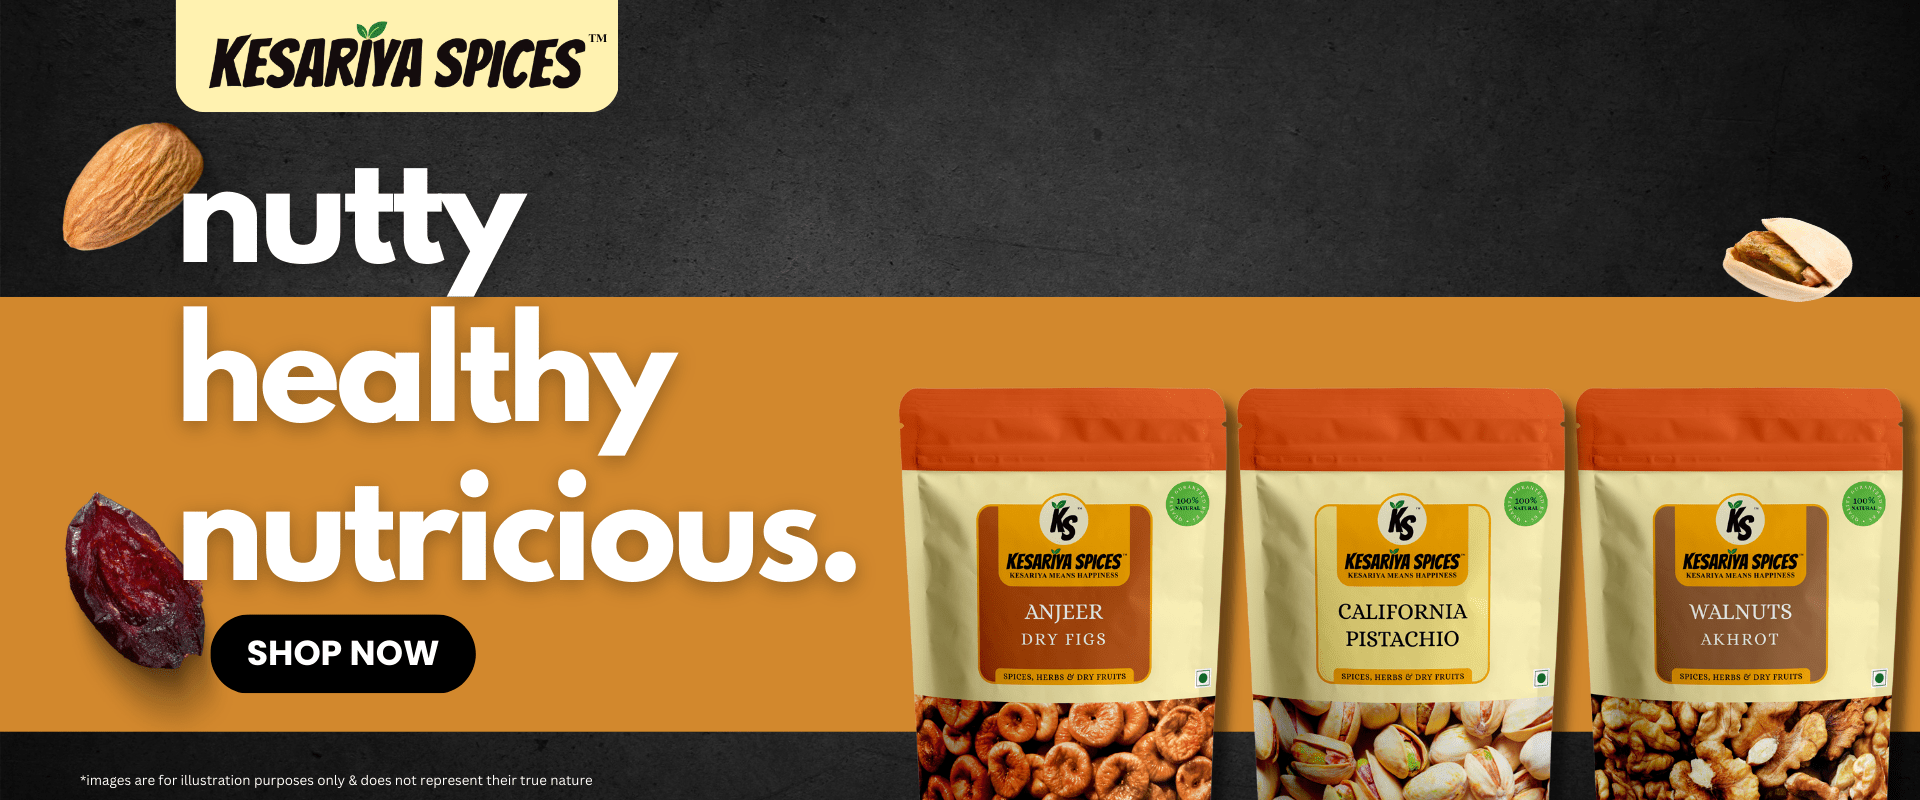 buy spices, herbs and dry fruits online at best prices